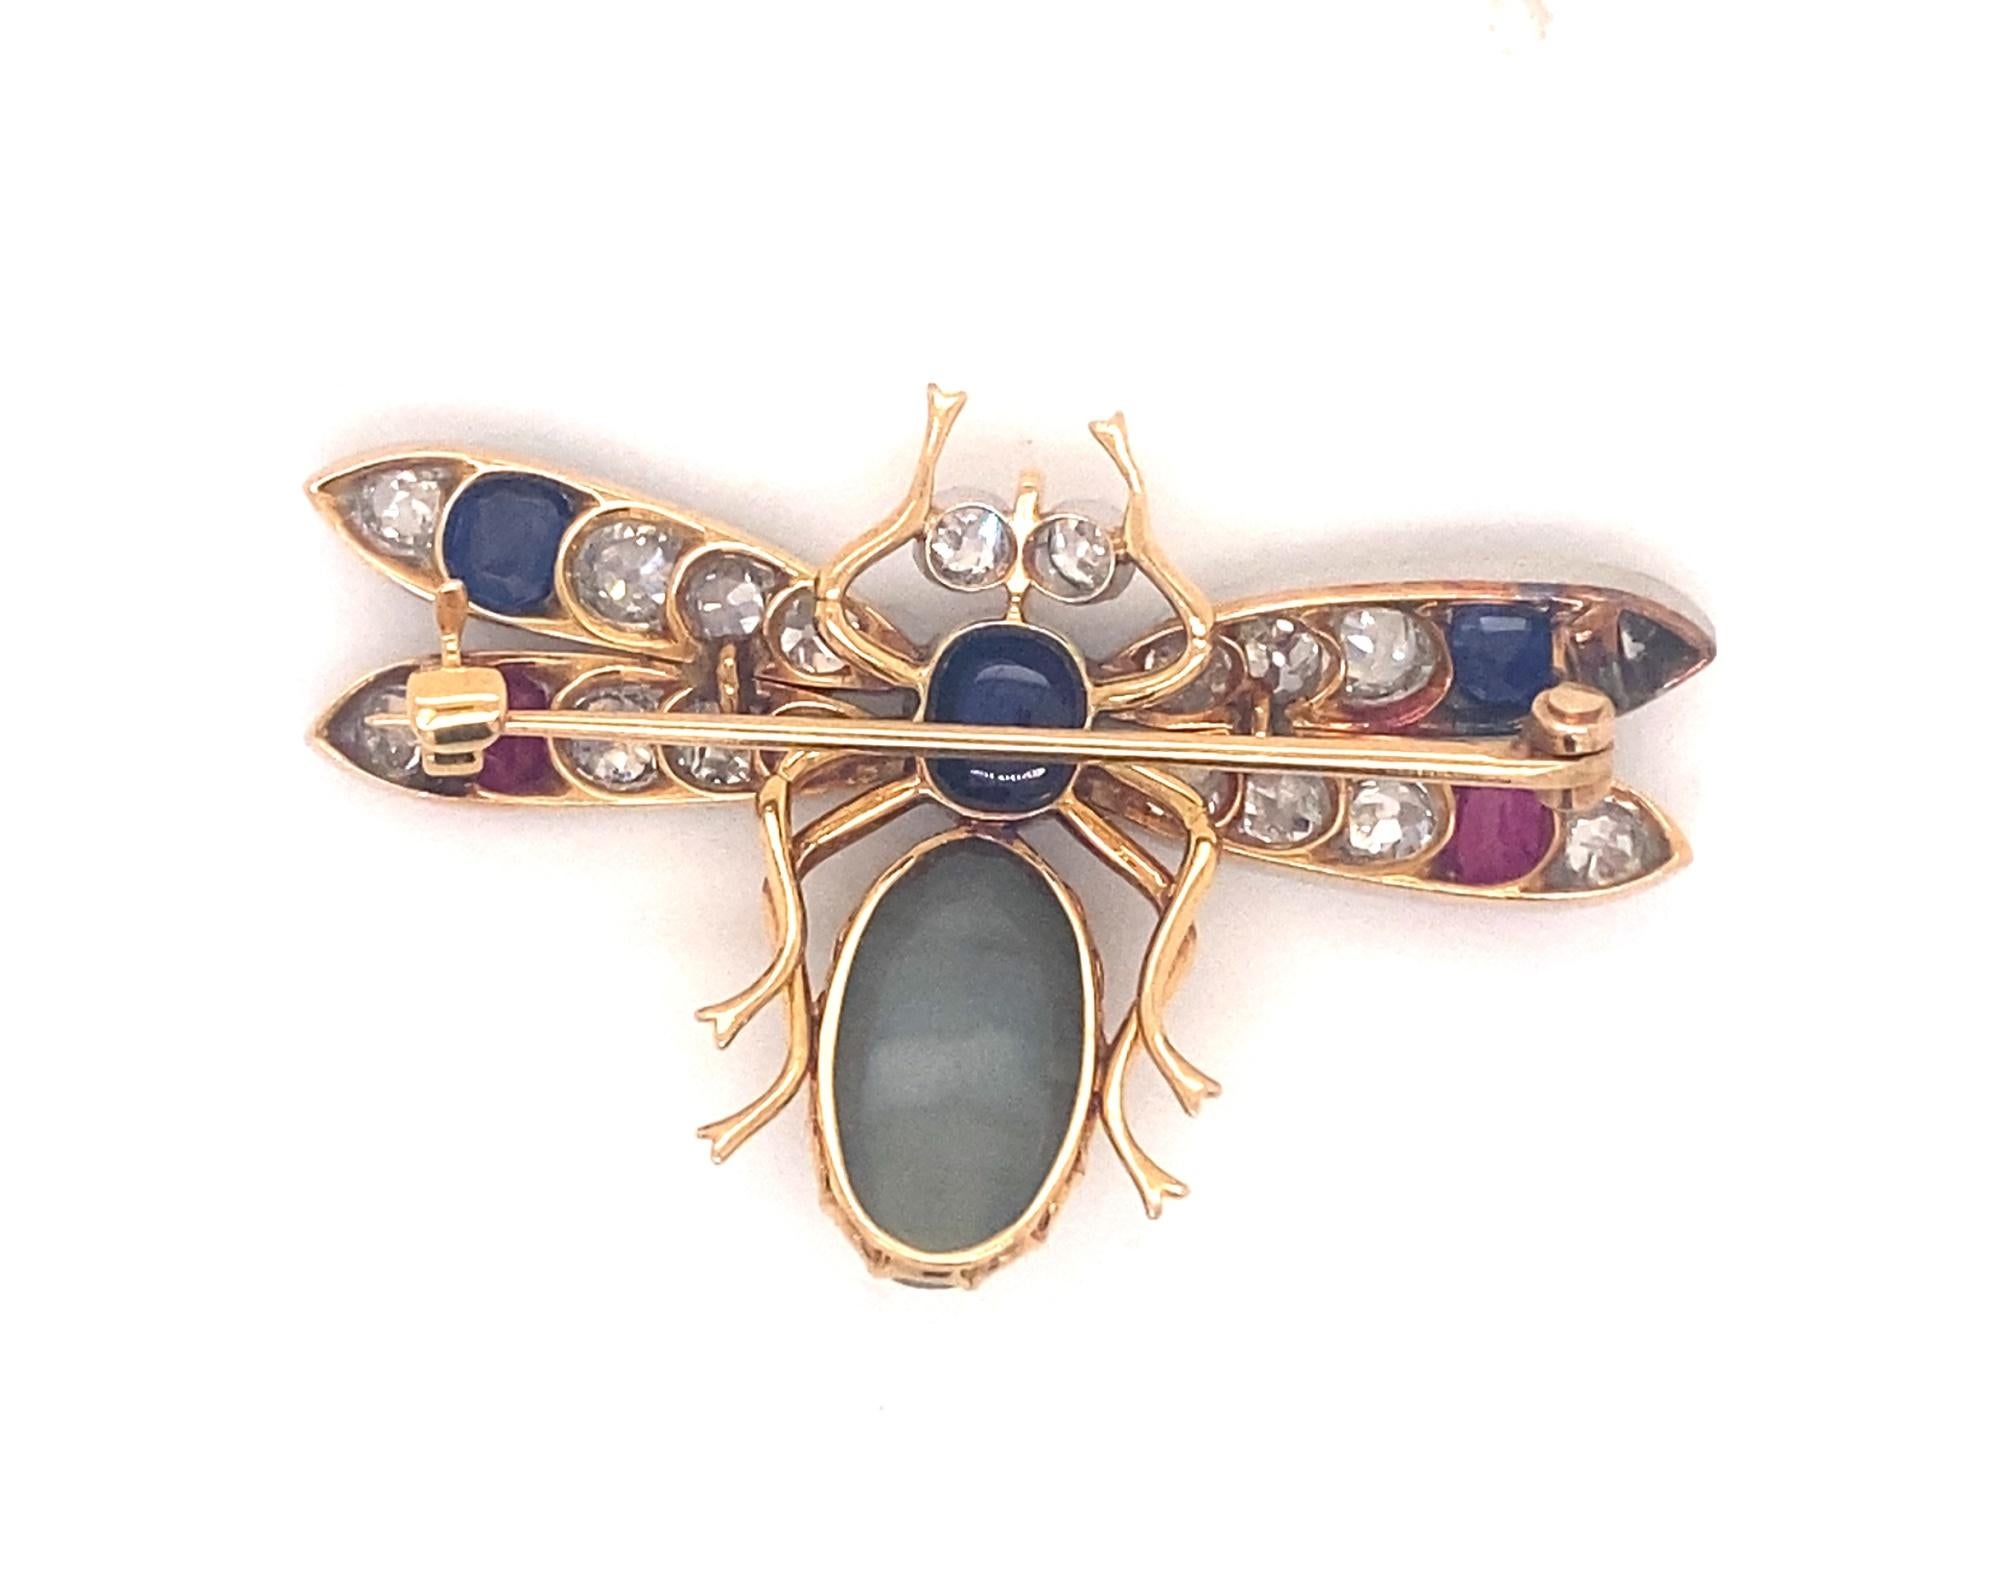 Victorian Antique 18K Gold Platinum Gem Cats Eye Diamonds Rubies Sapphires Insect Brooch For Sale